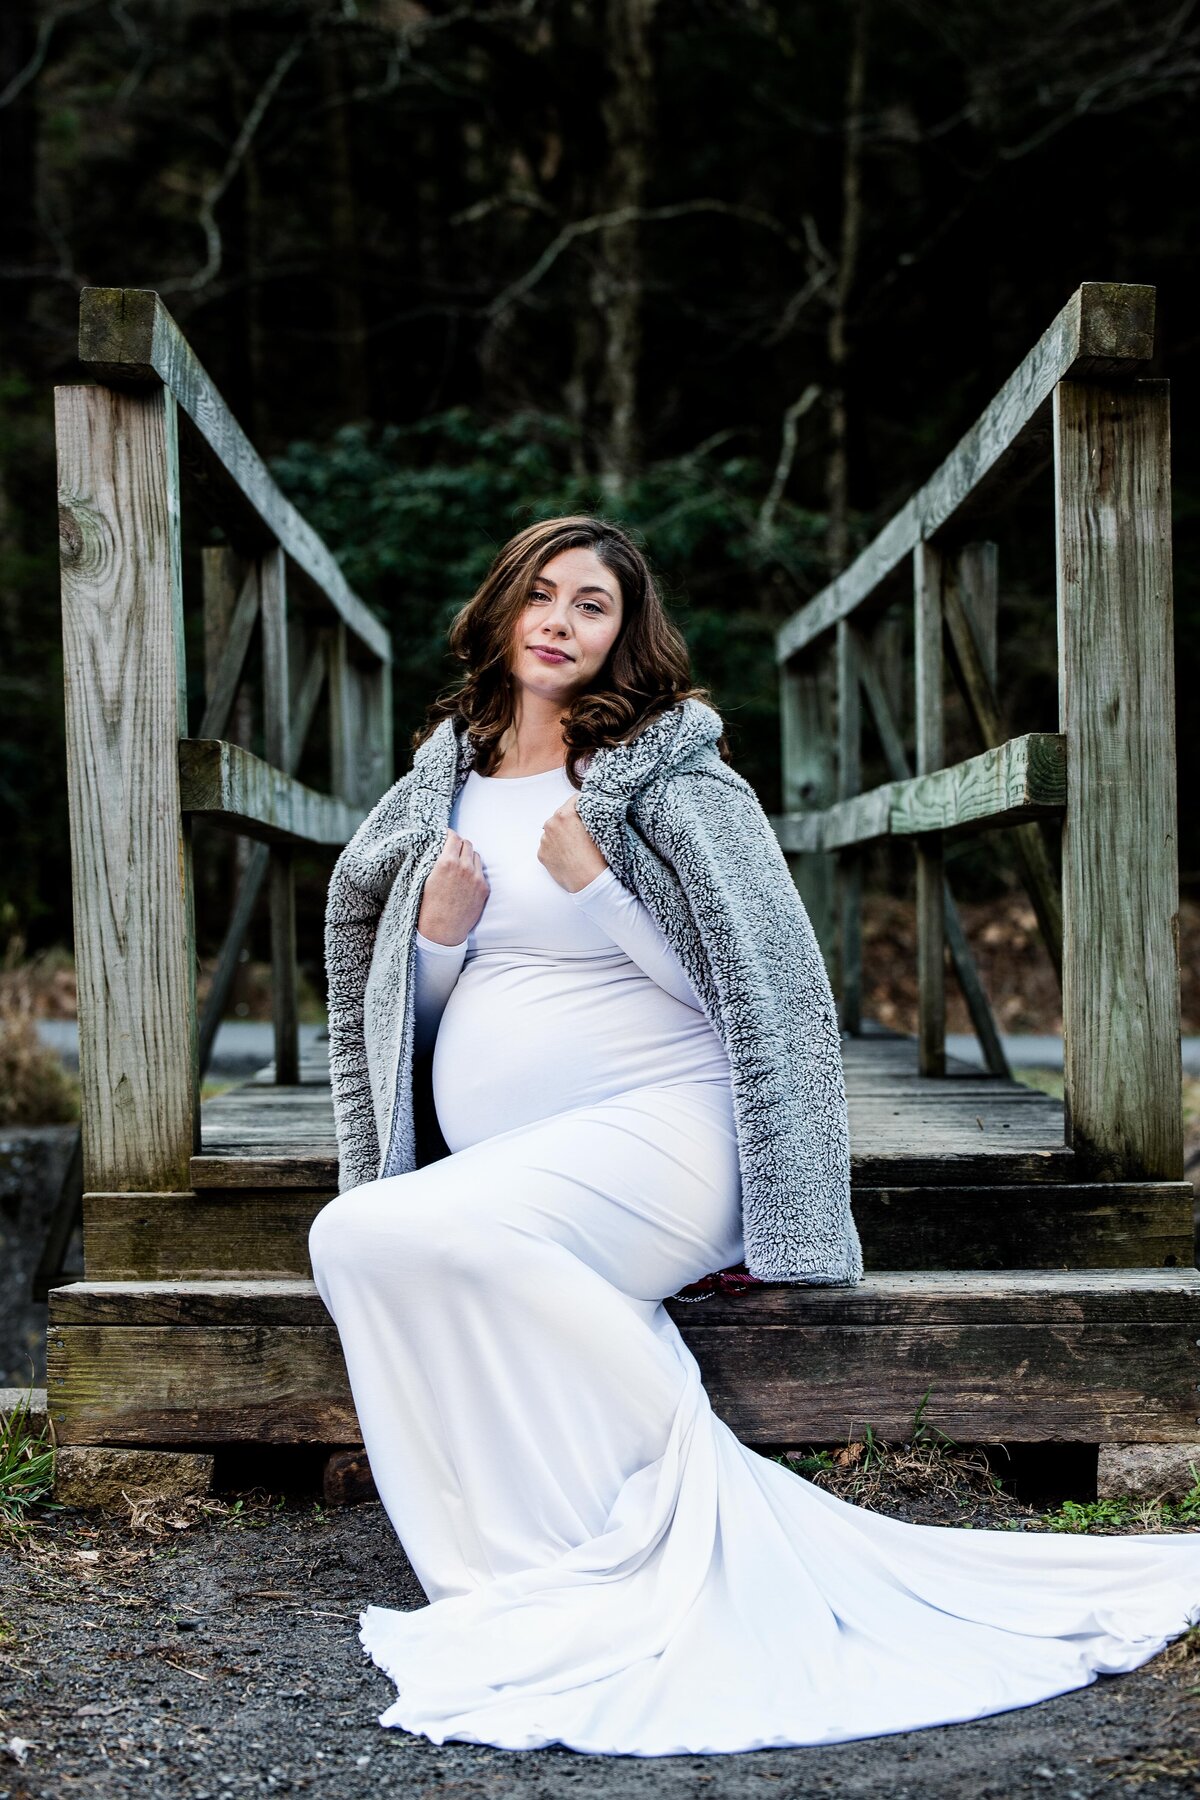 a pregnant woman wears a flowing white dress, holding a jean jacket over her shoulders